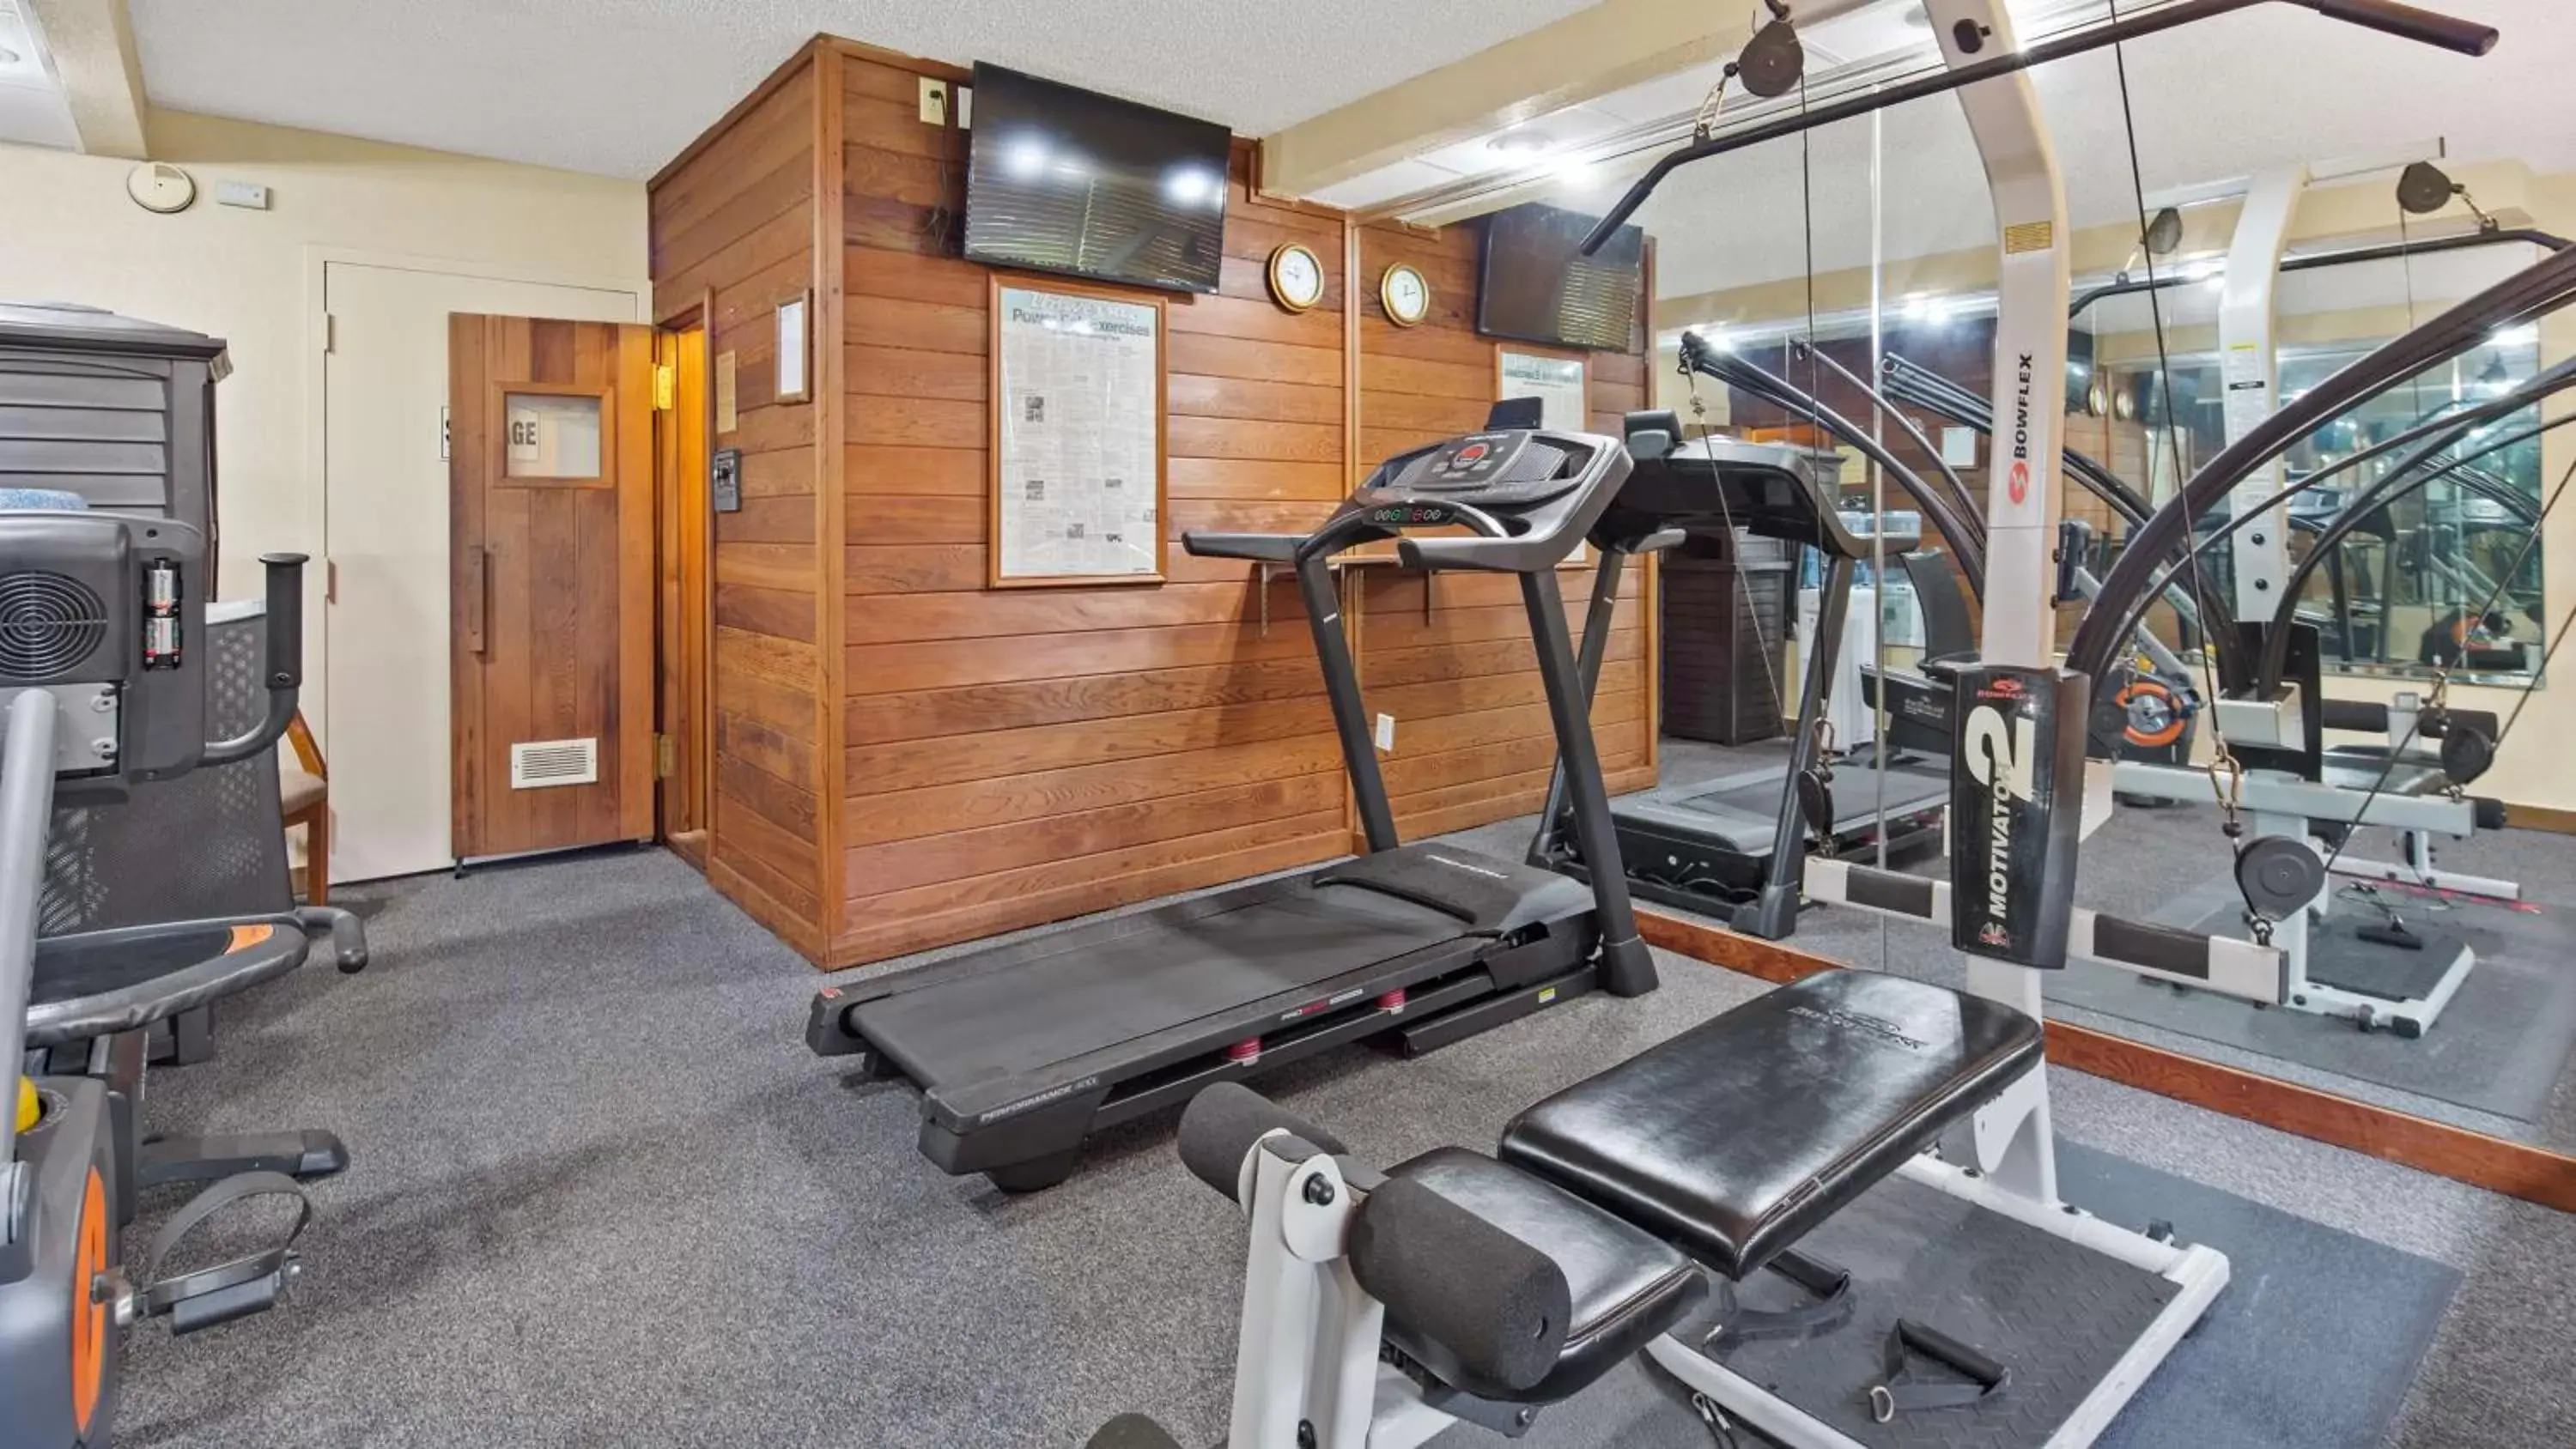 Fitness centre/facilities, Fitness Center/Facilities in Best Western Executive Inn